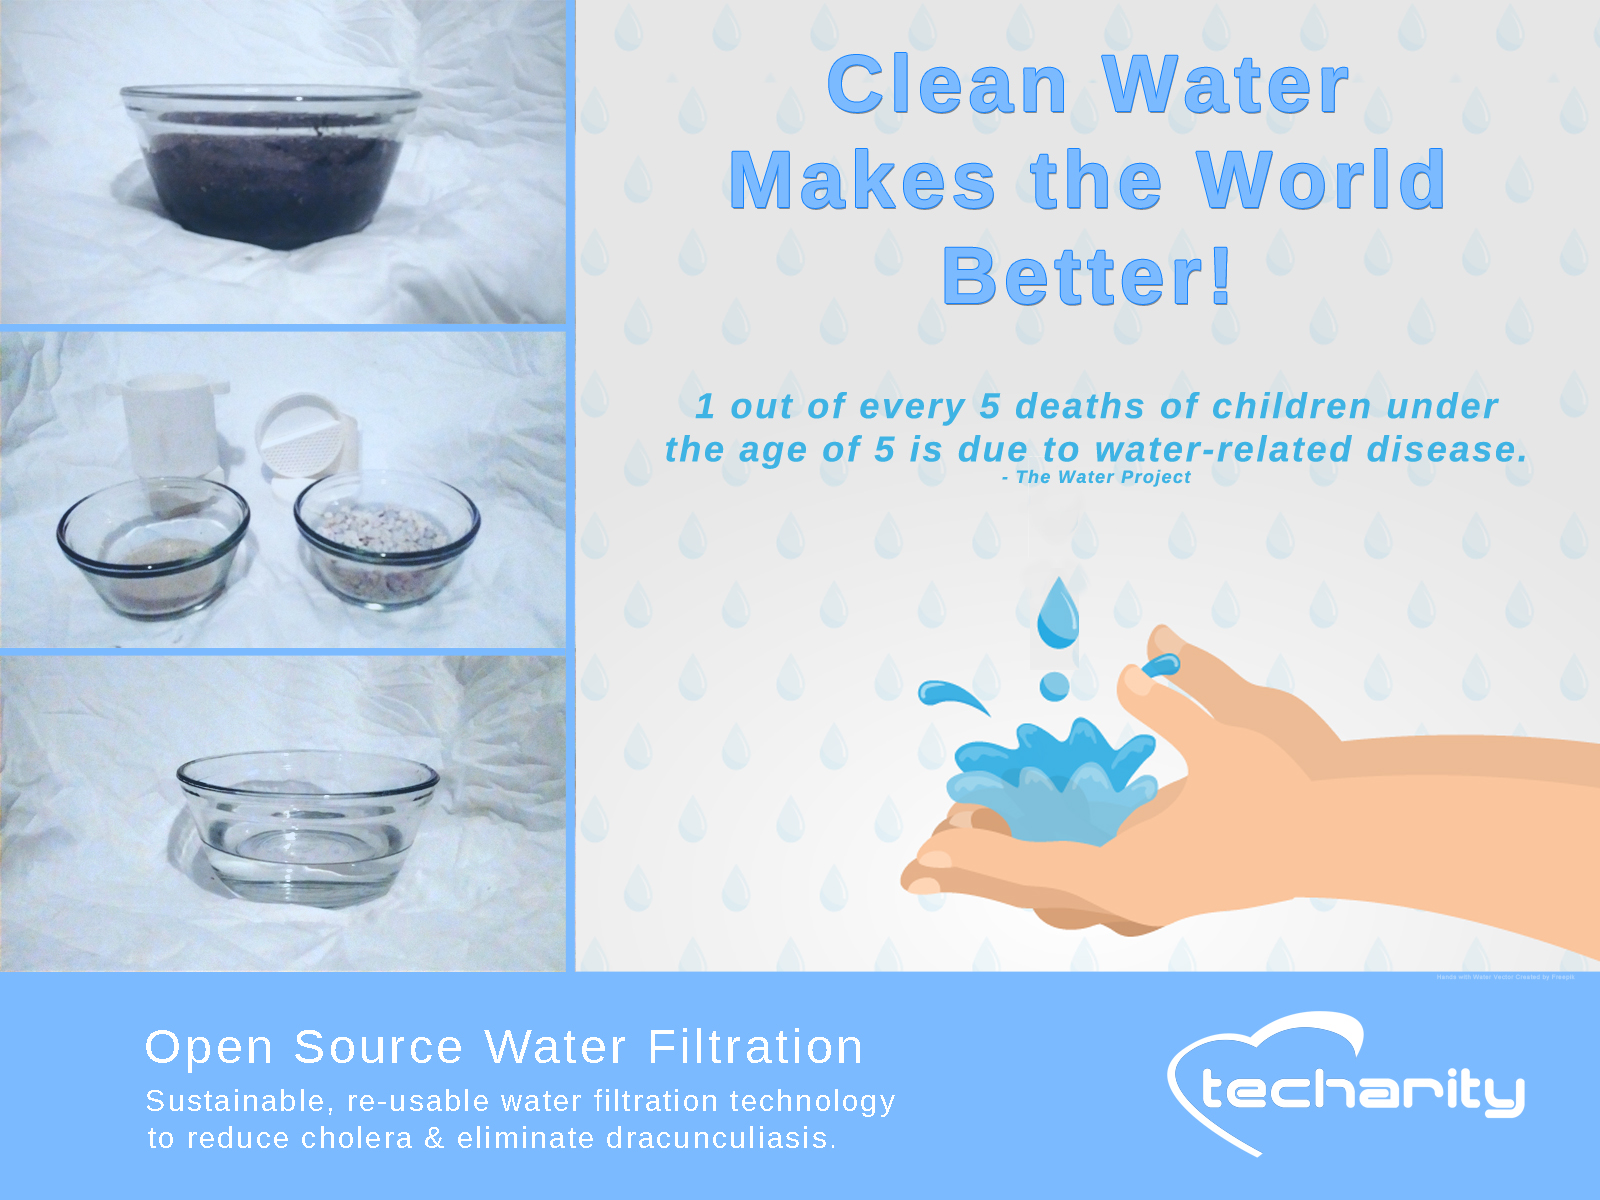 Clean water makes the world better